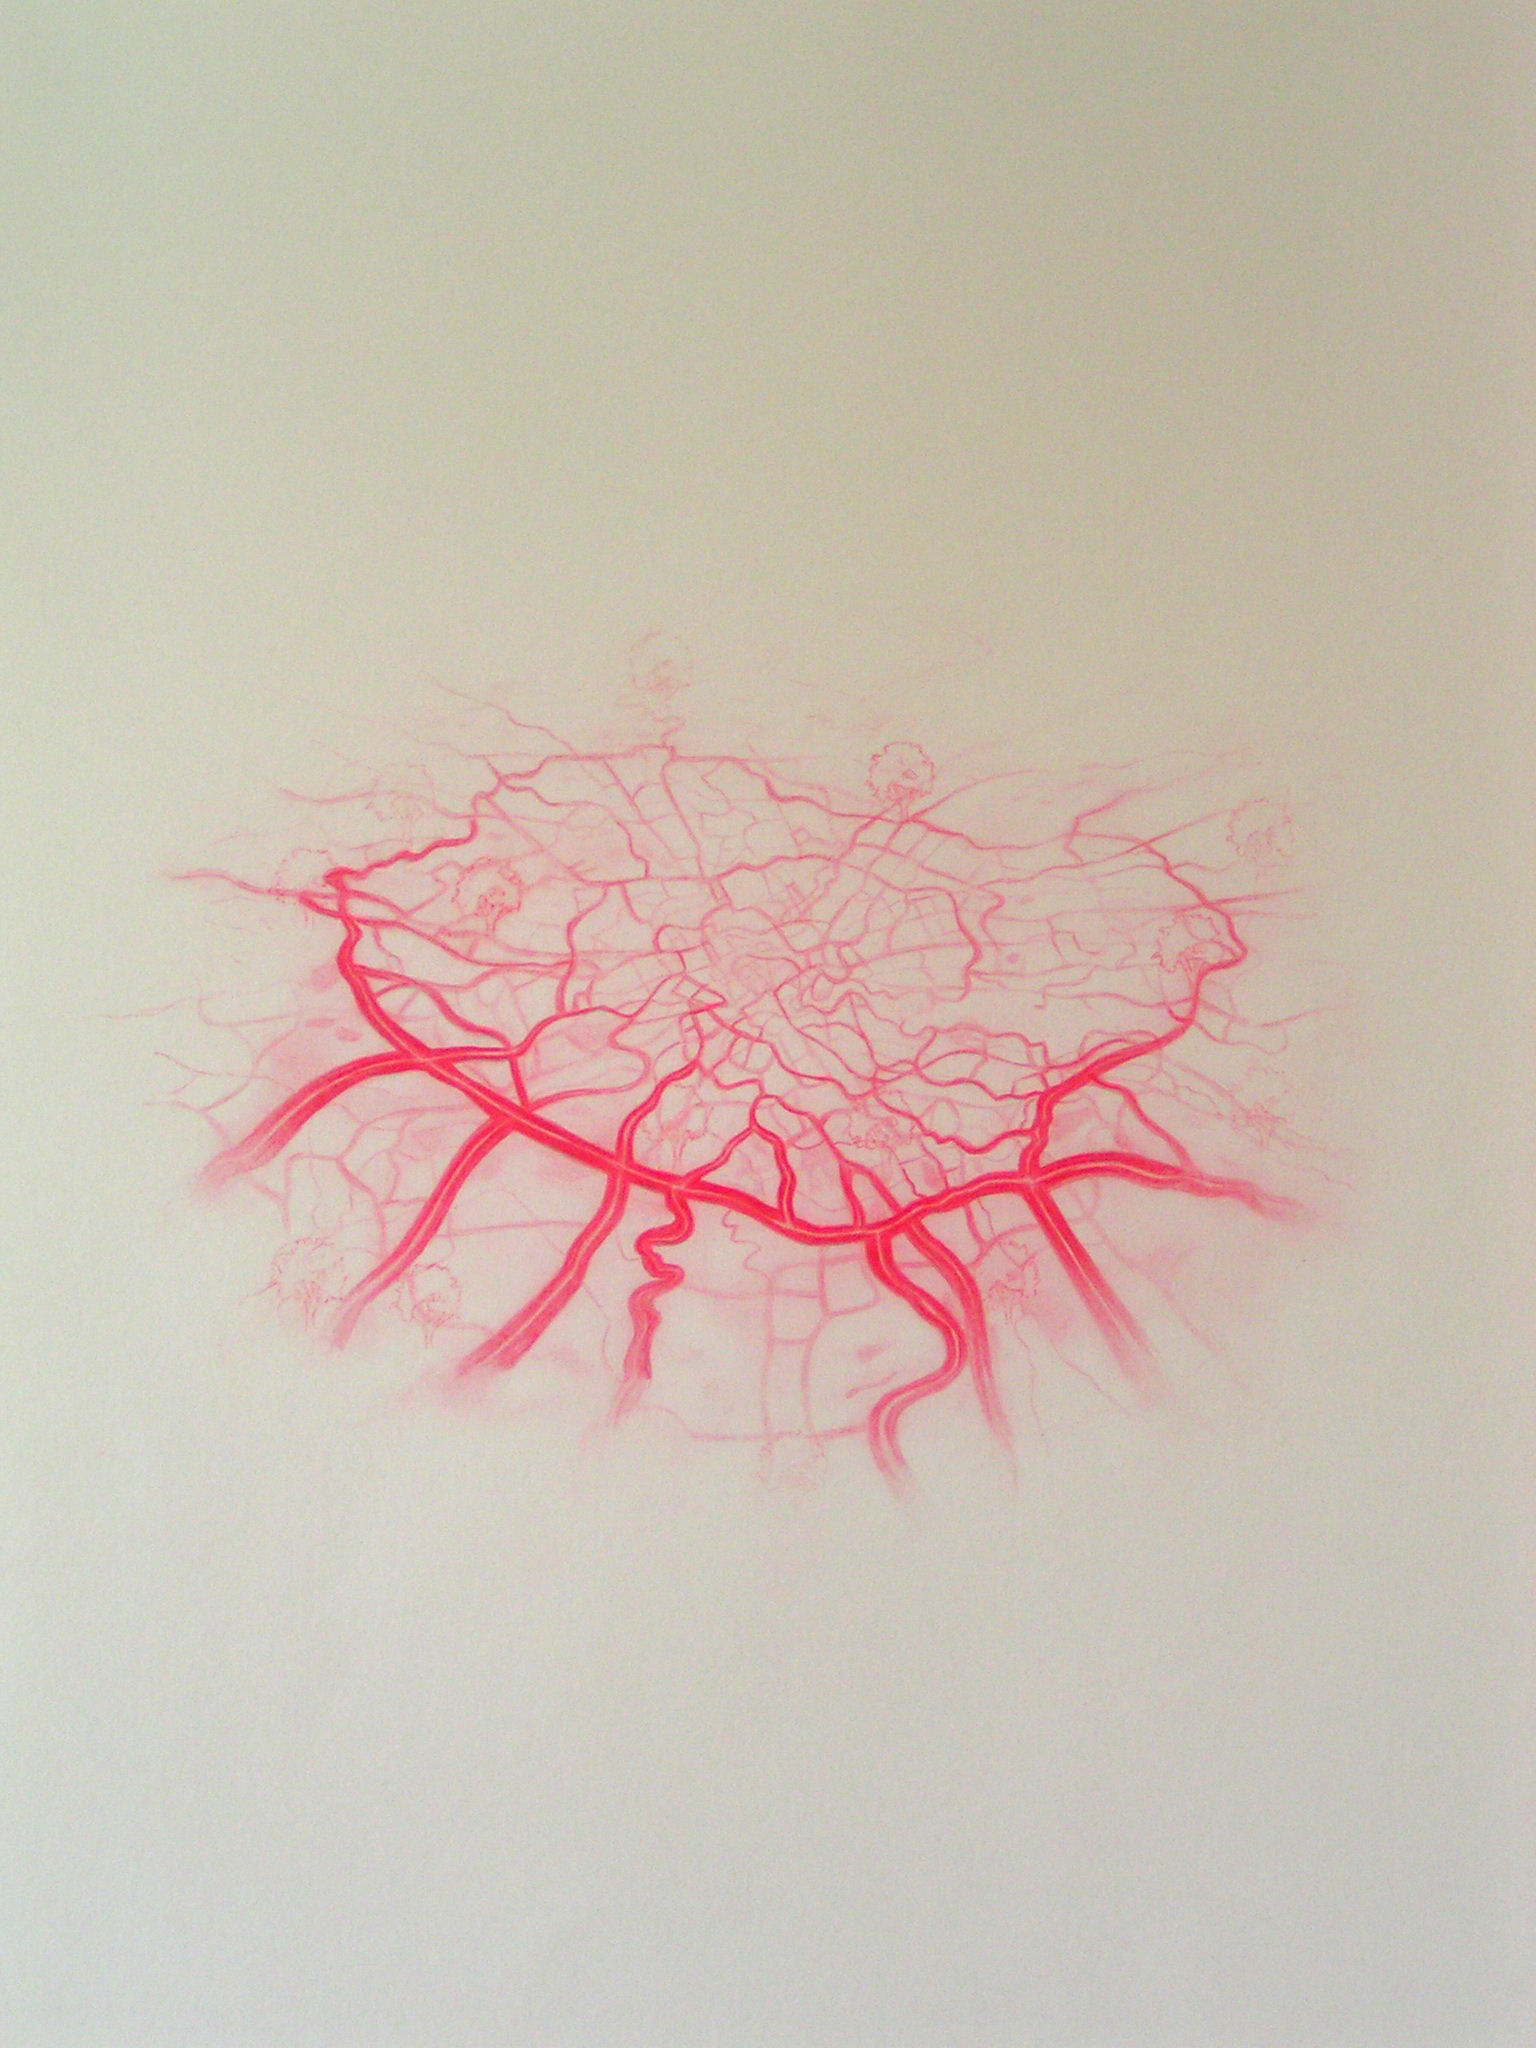 Emma J Williams ' Untitled Red Drawing No.10' 2008 pencil on paper